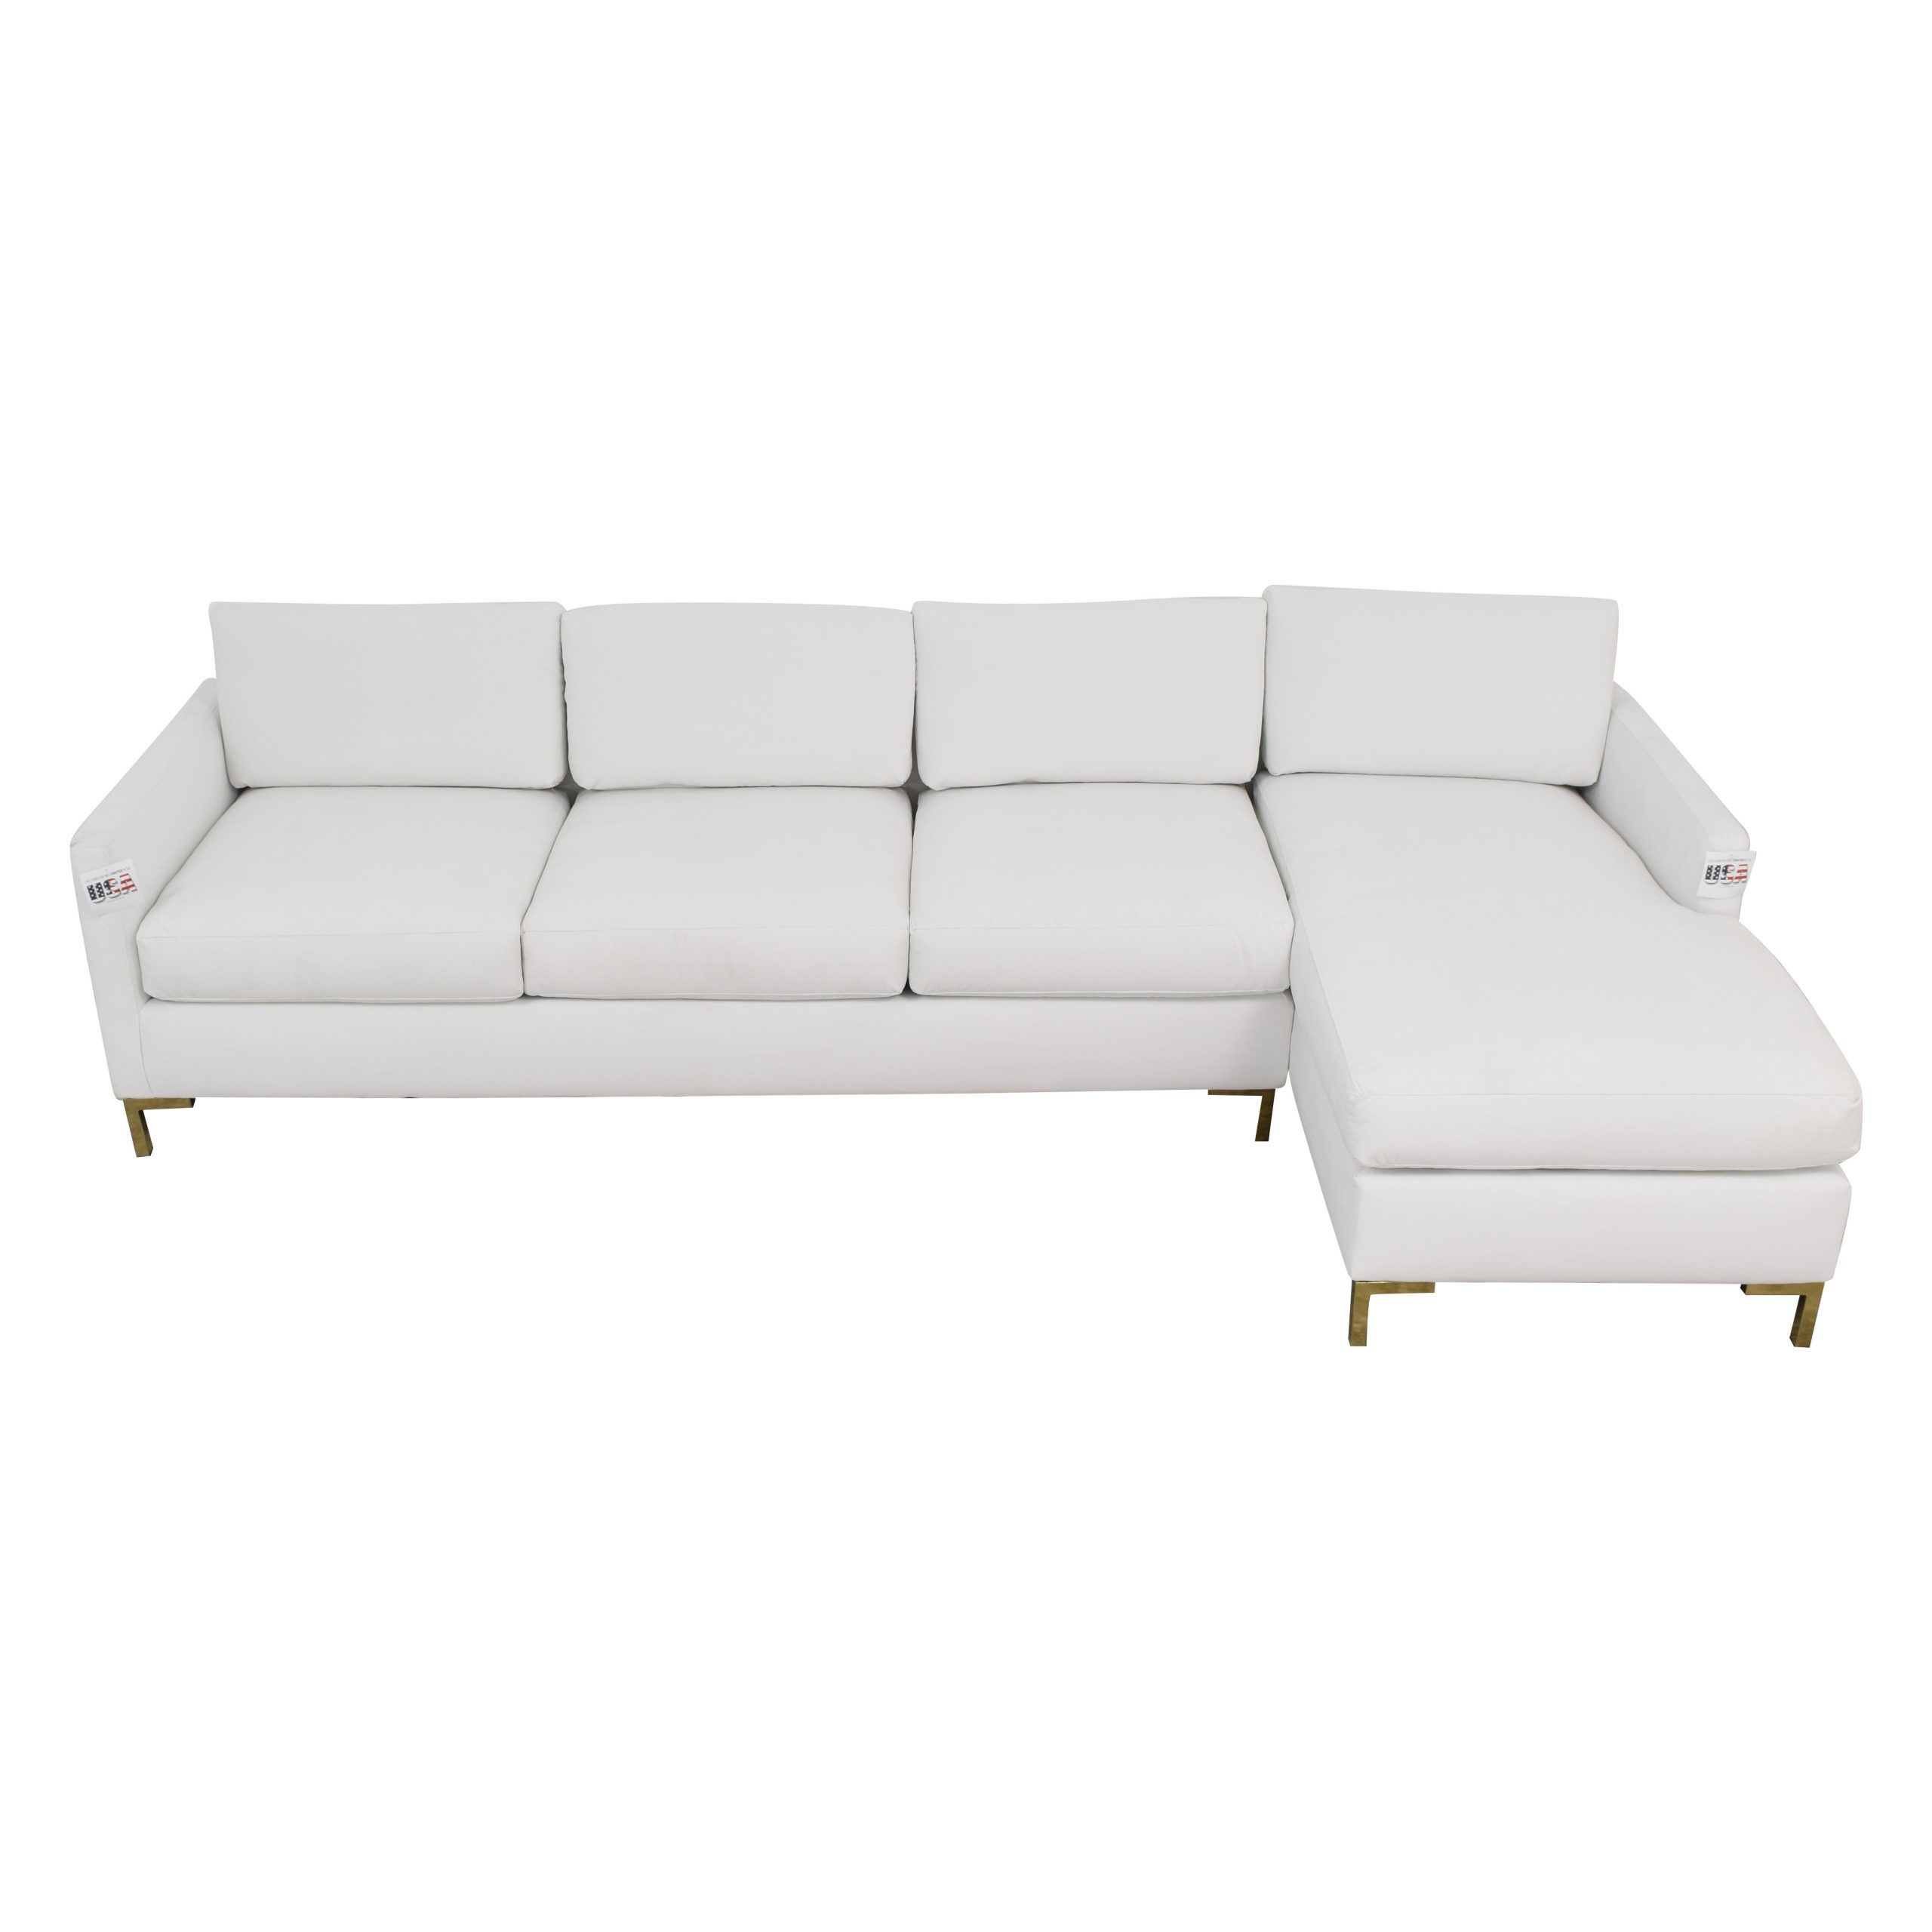 37% Off – The Inside The Inside Modern Sectional Right In Kiefer Right Facing Sectional Sofas (View 8 of 15)